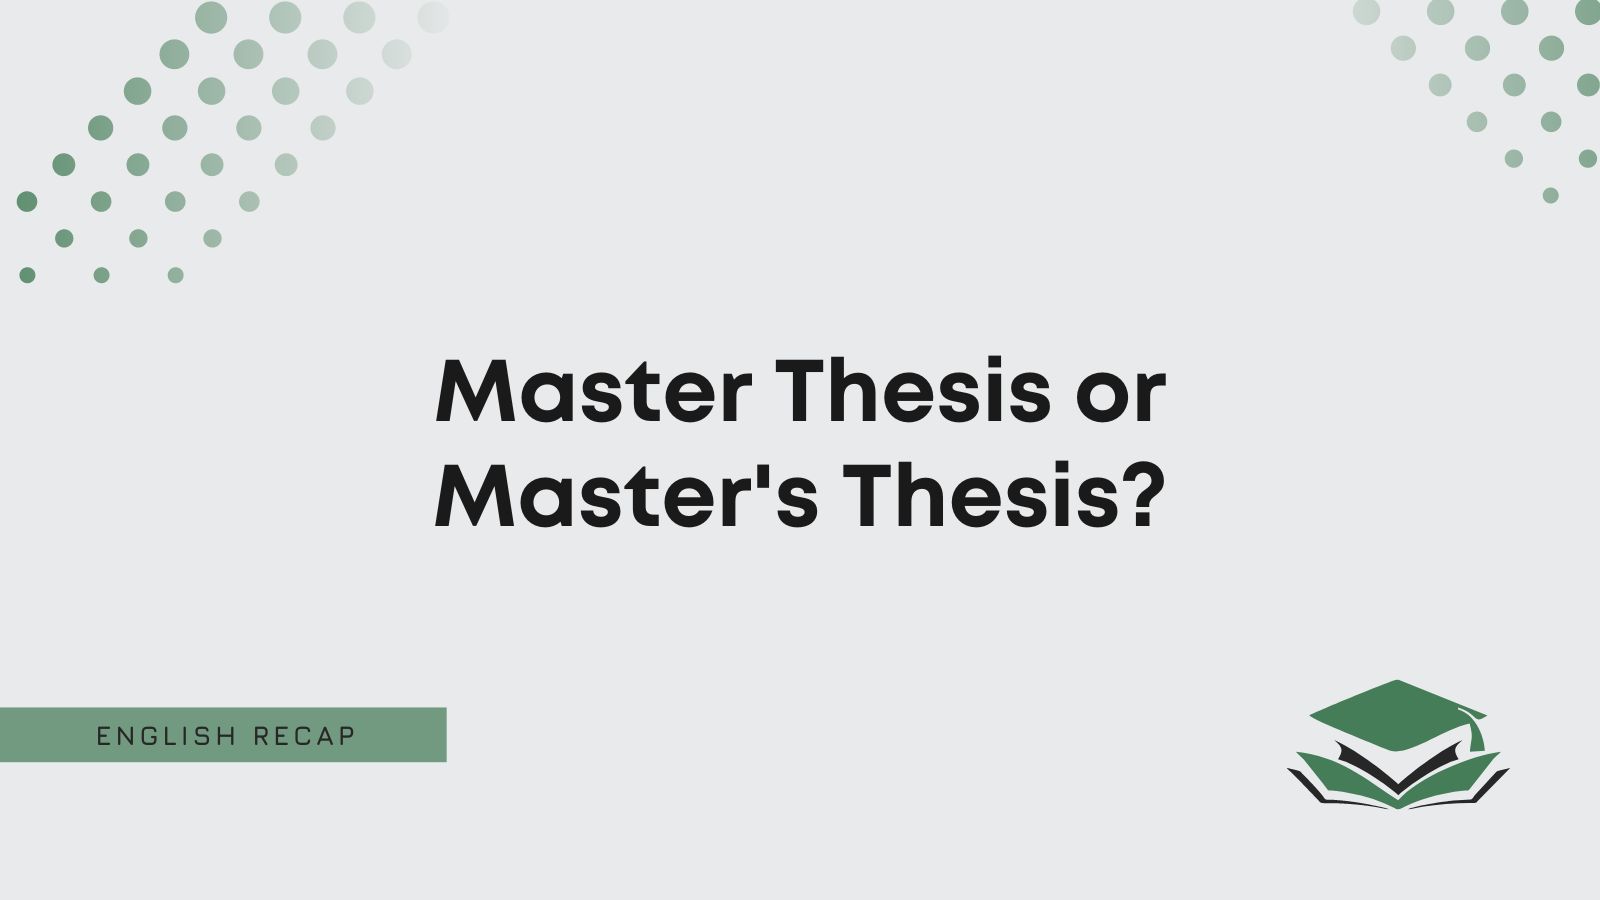 plural of master's thesis